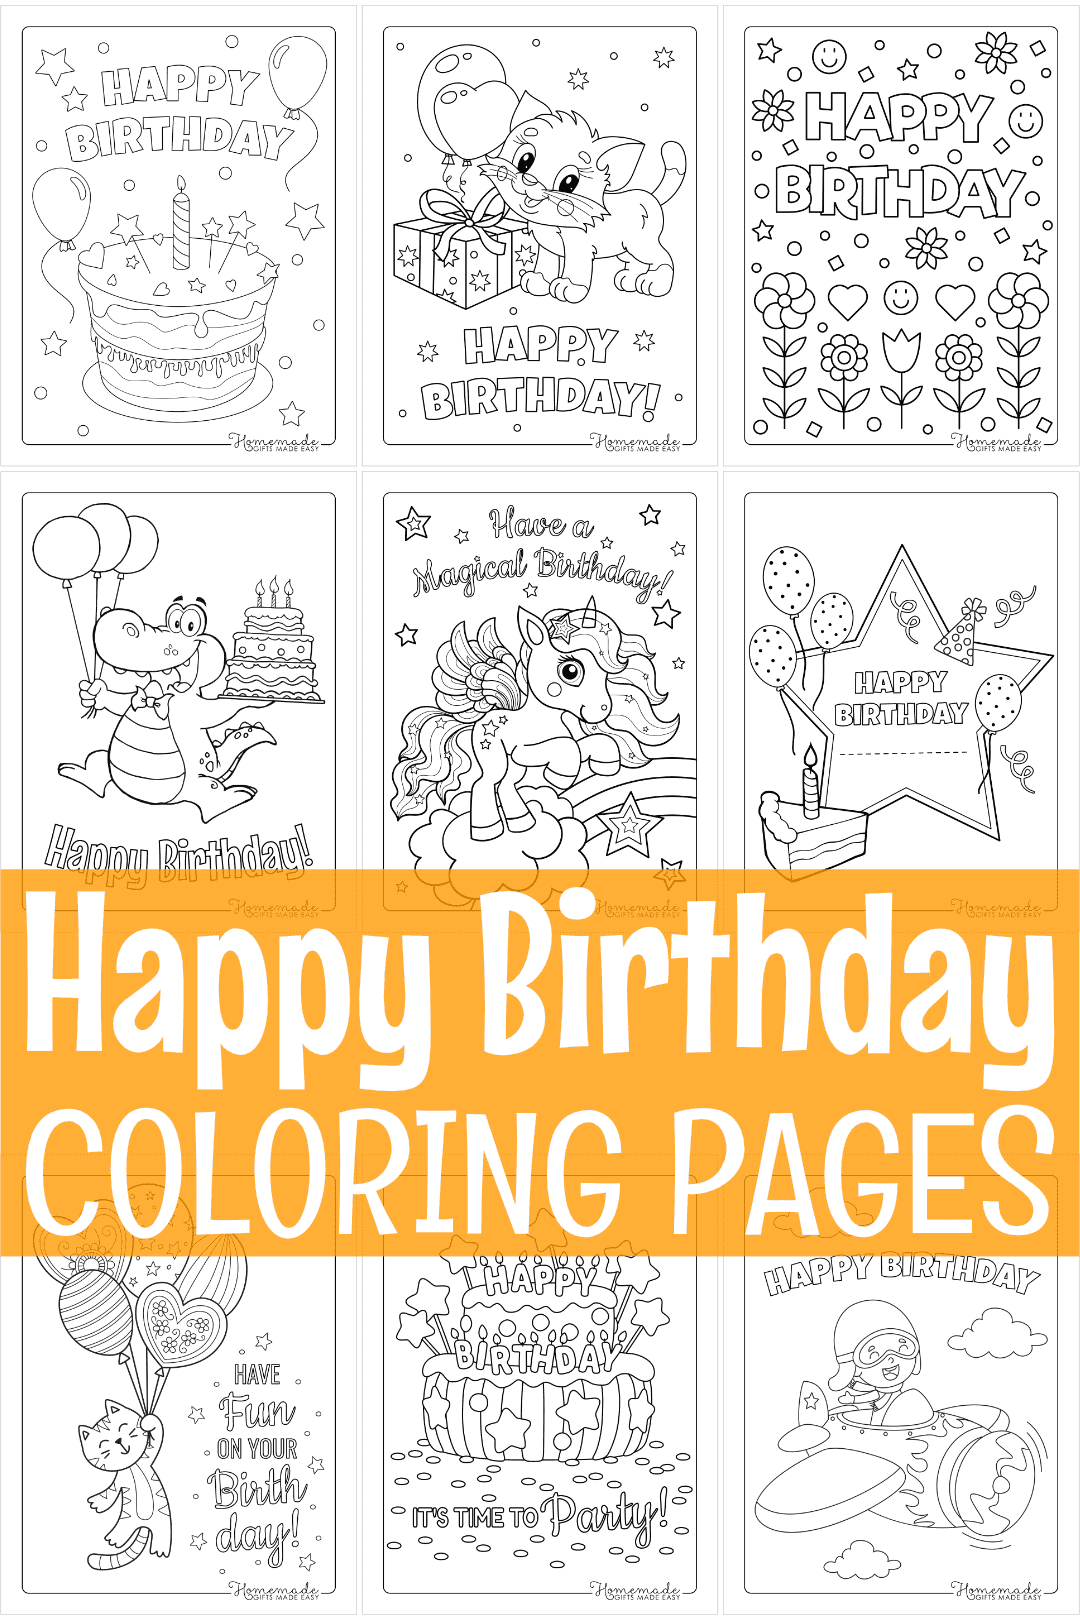 happy birthday images for kids